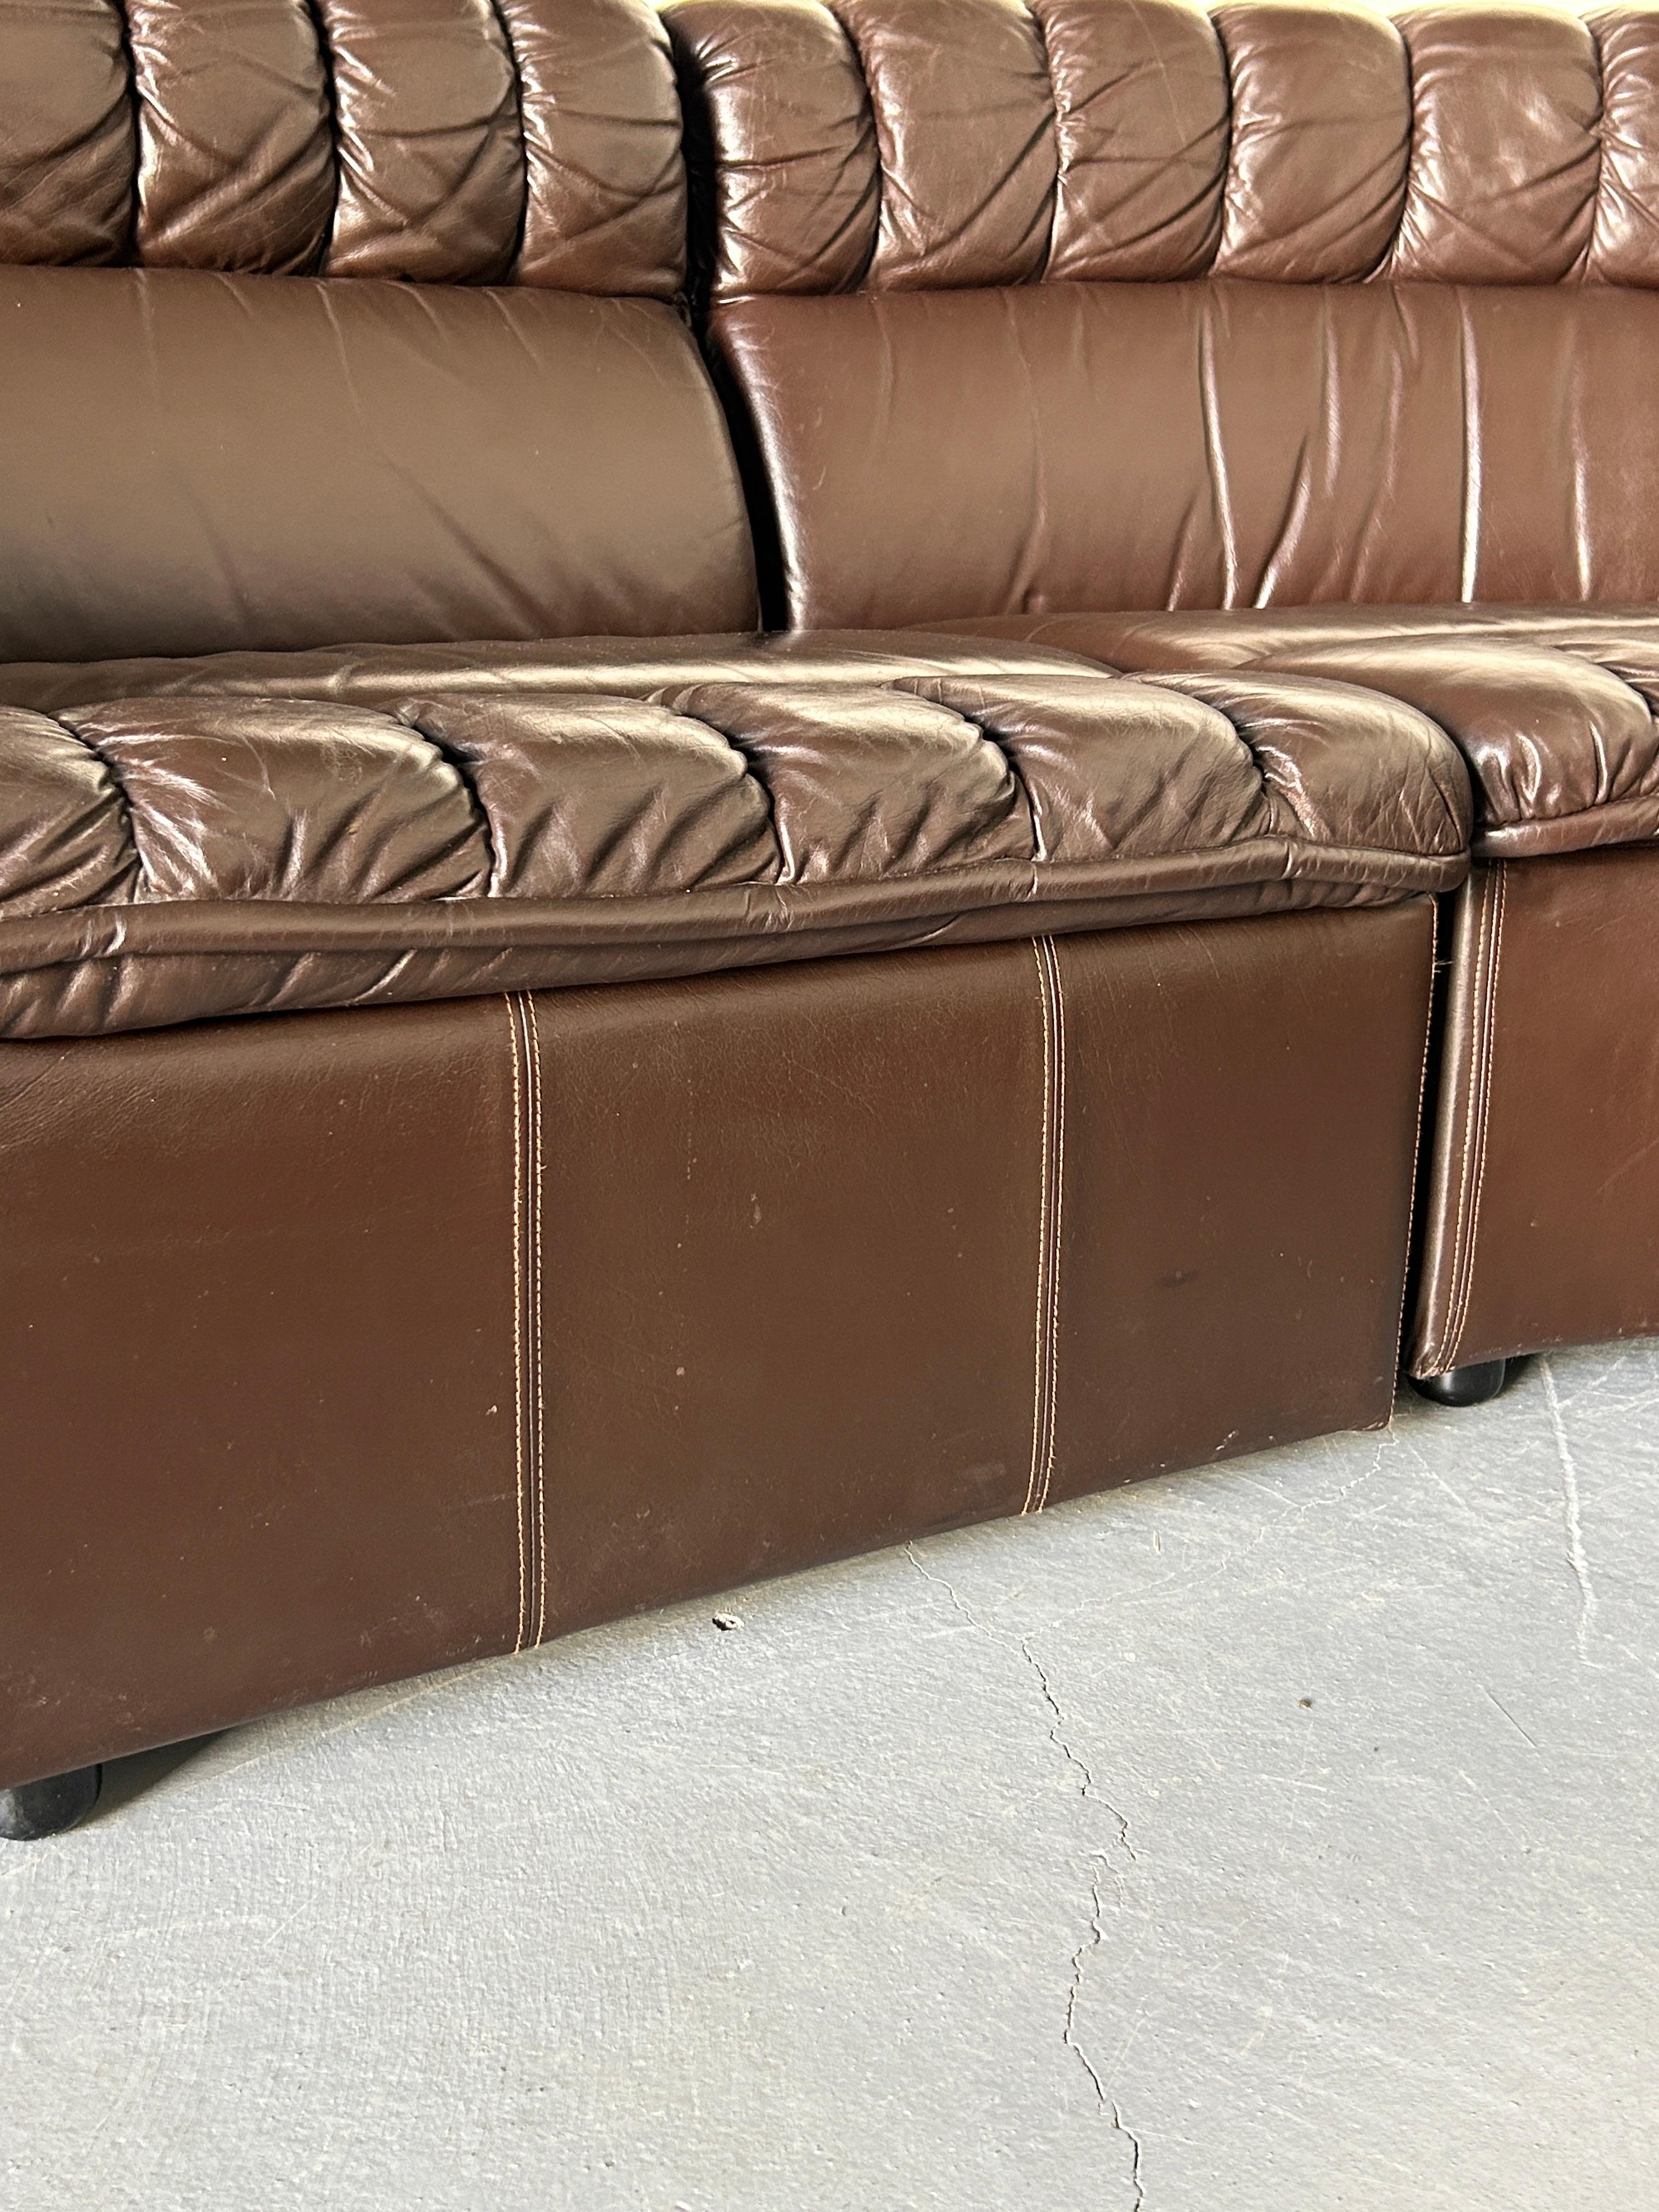 Mid-Century-Modern Leather Snake Sofa in style of De Sede DS-600 Non-Stop, 1970s For Sale 13